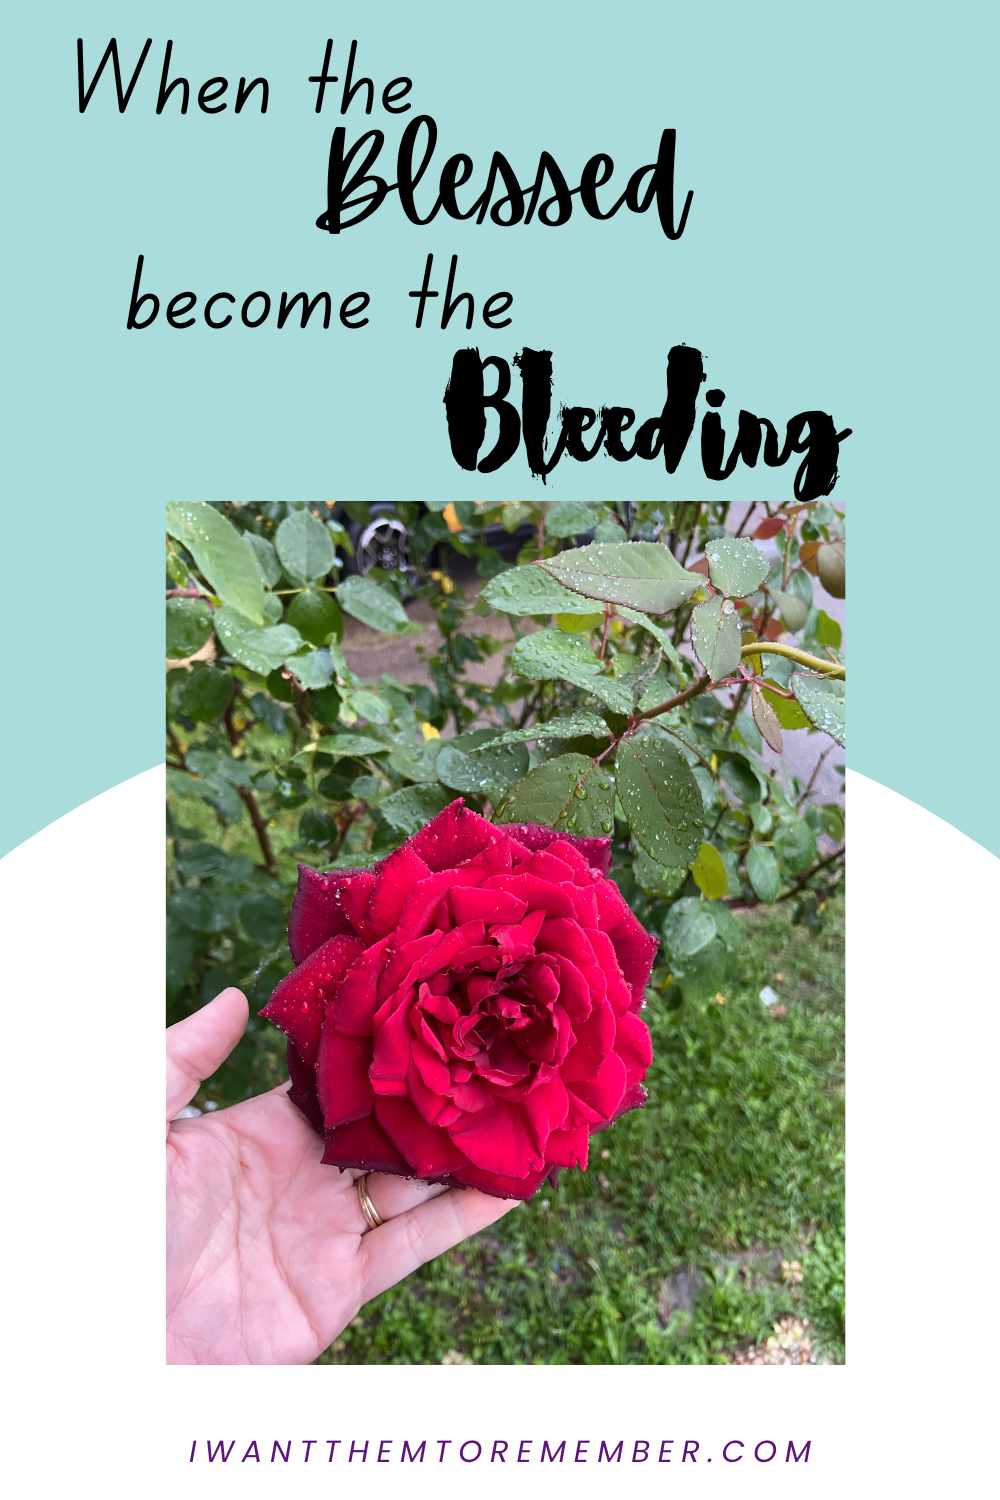 hand holding red rose on bush, words "when the blessed become the bleeding"